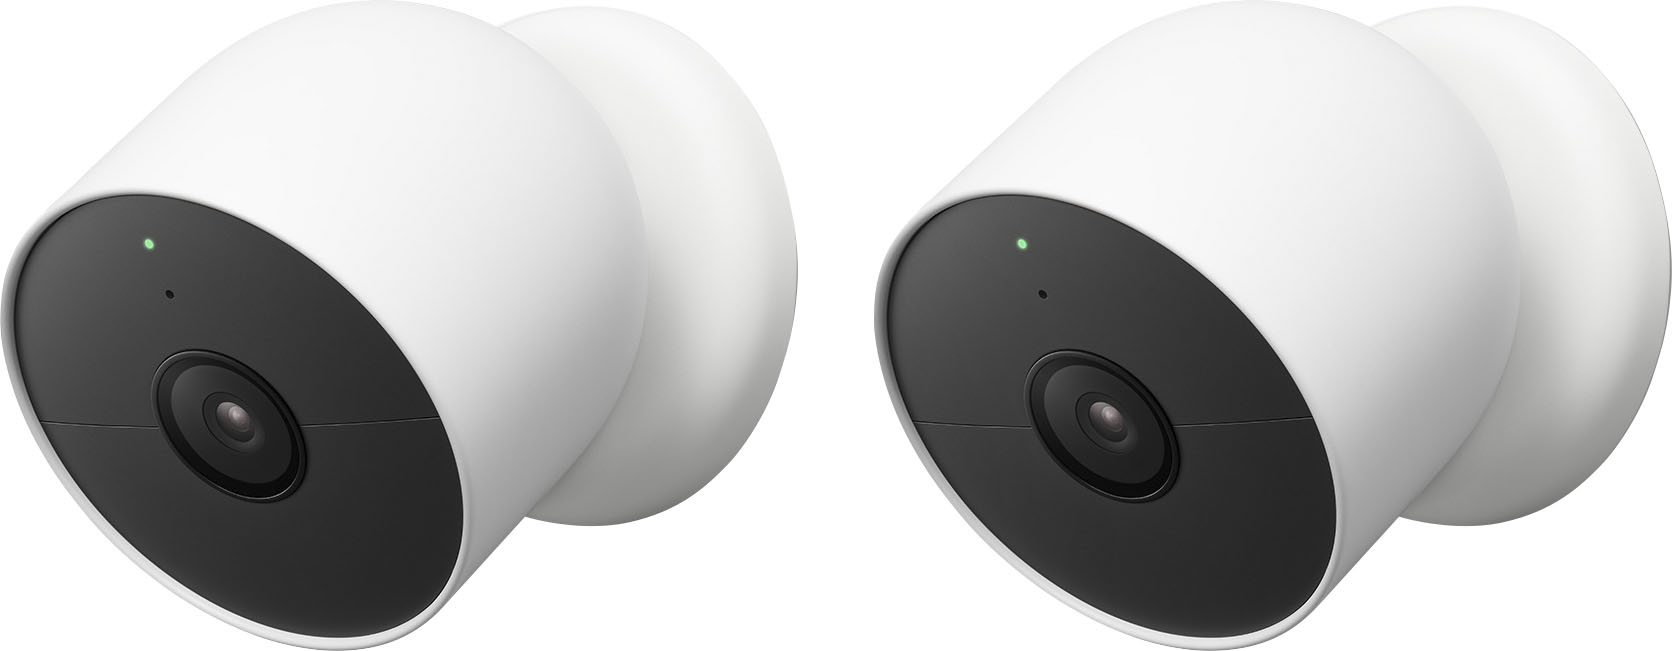 Say hello to Nest Cam